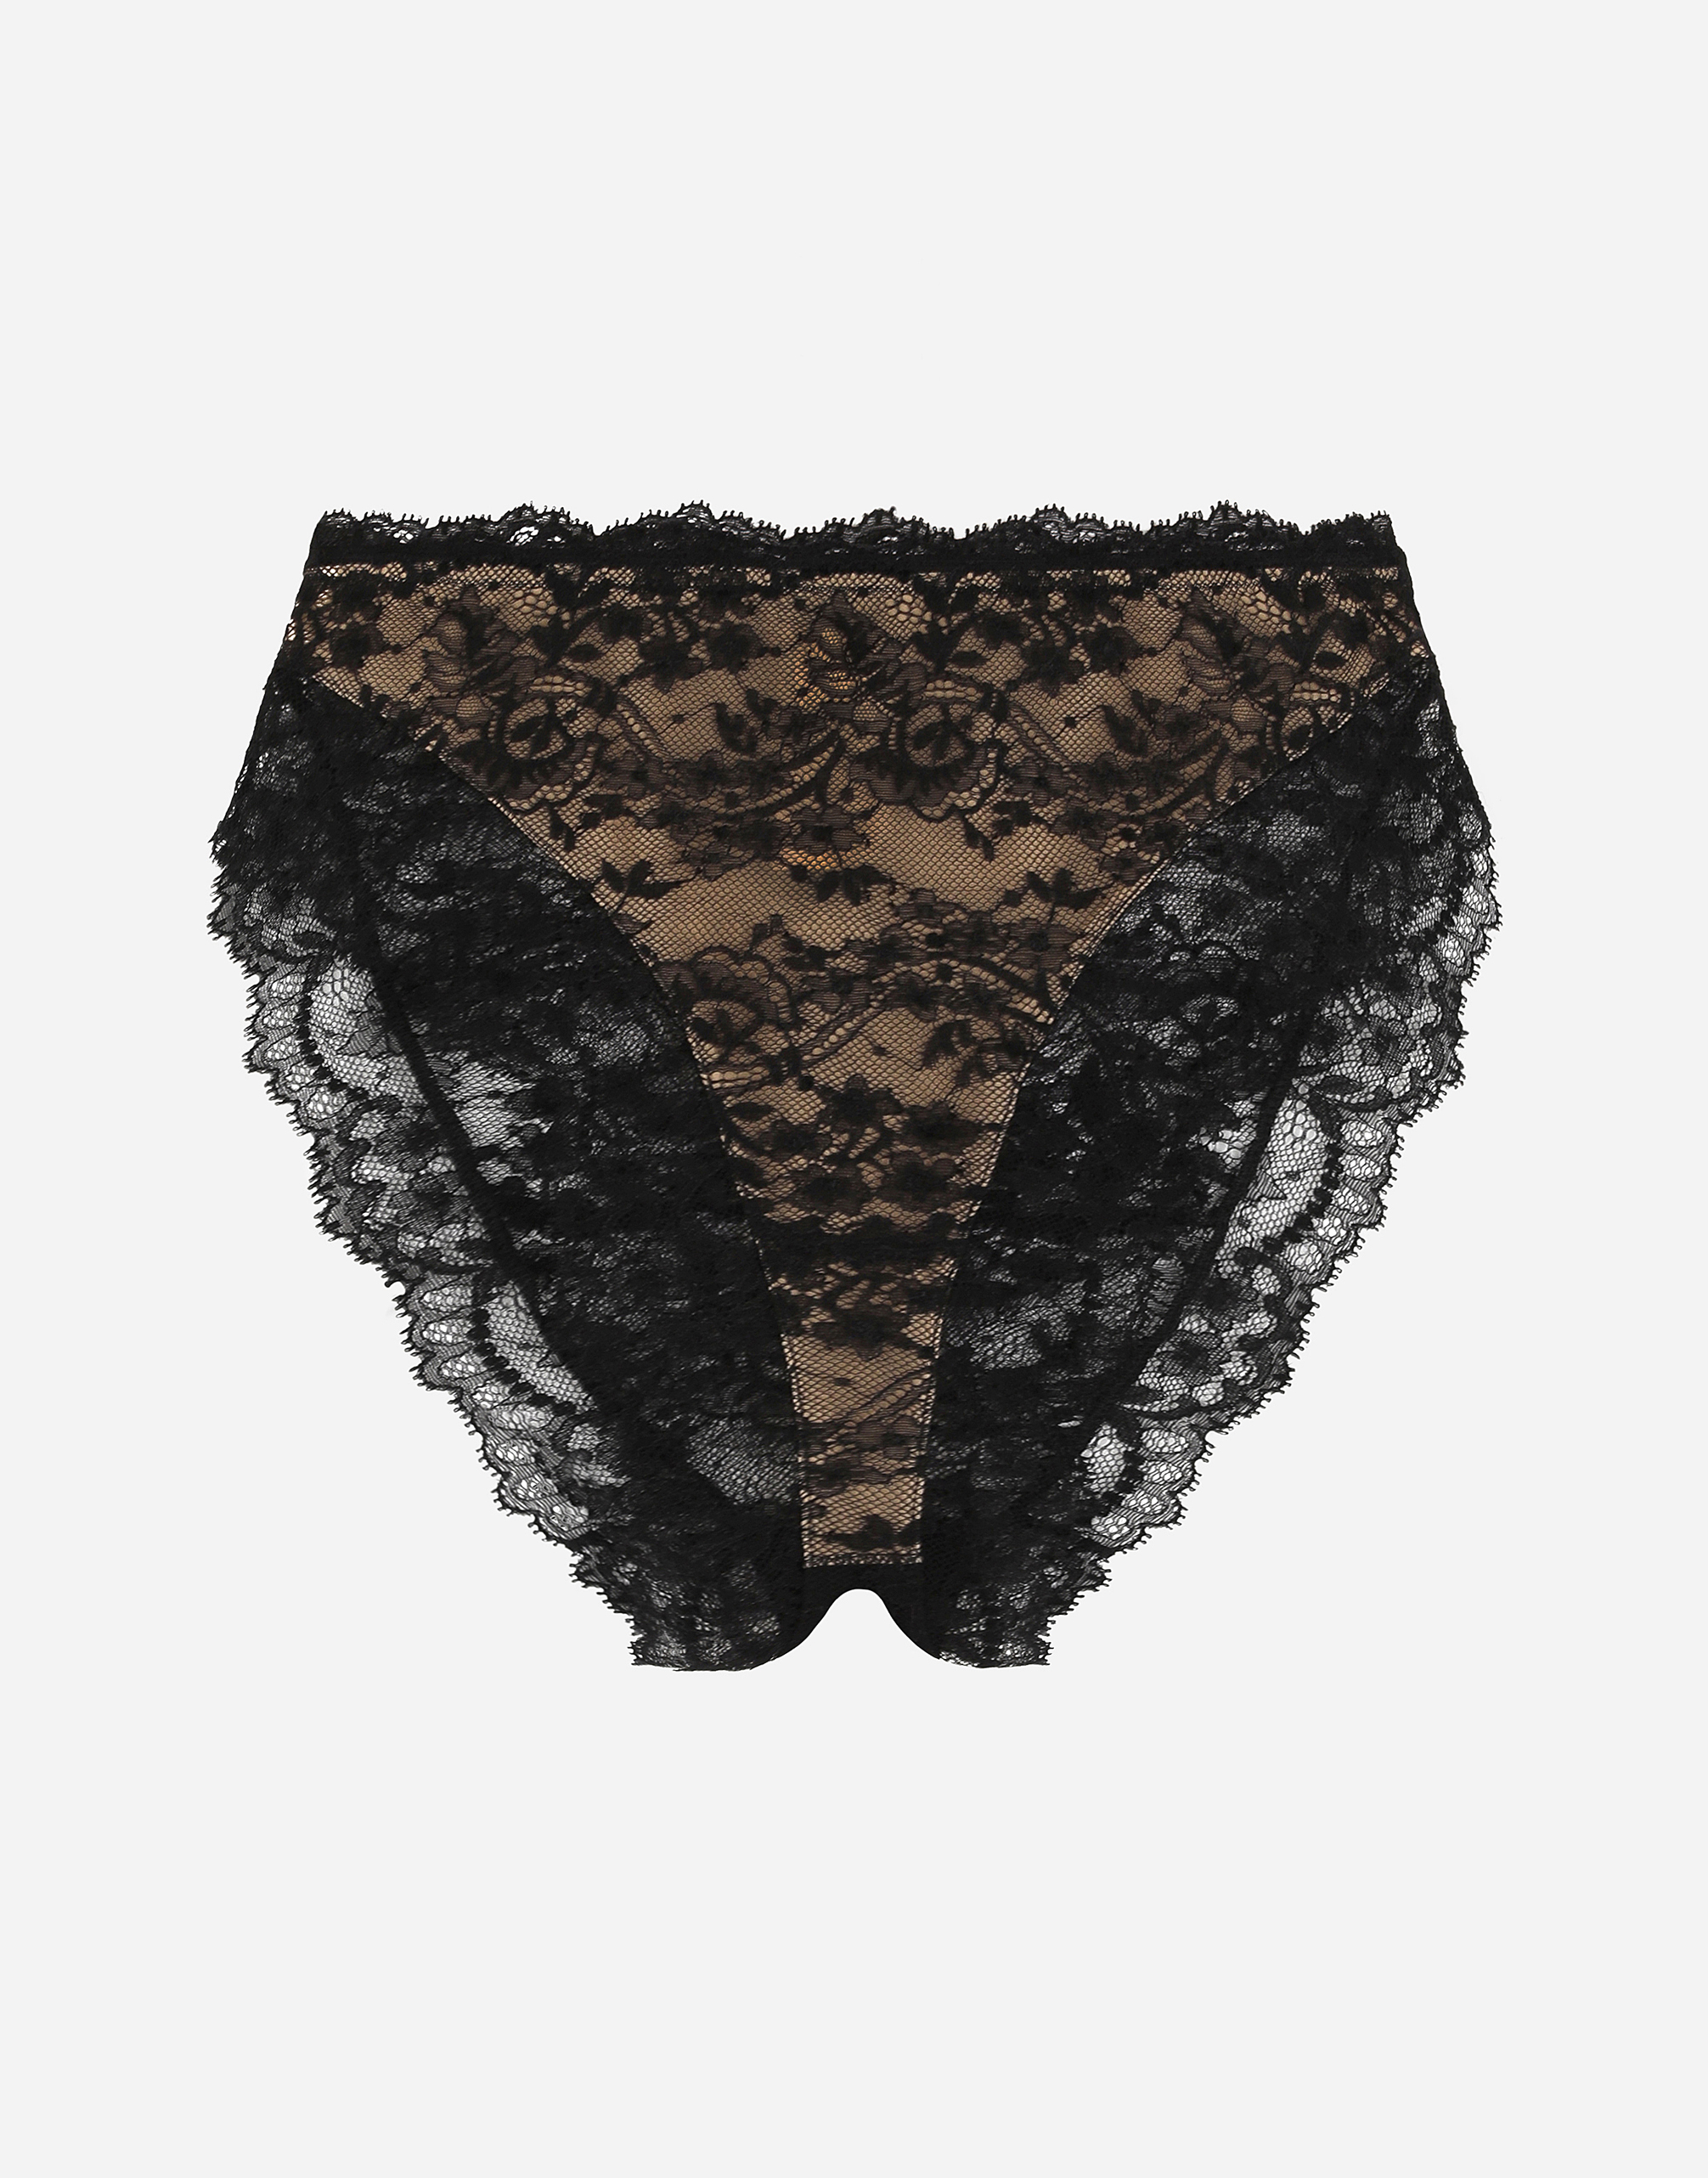 High-waisted Chantilly lace panties in Black